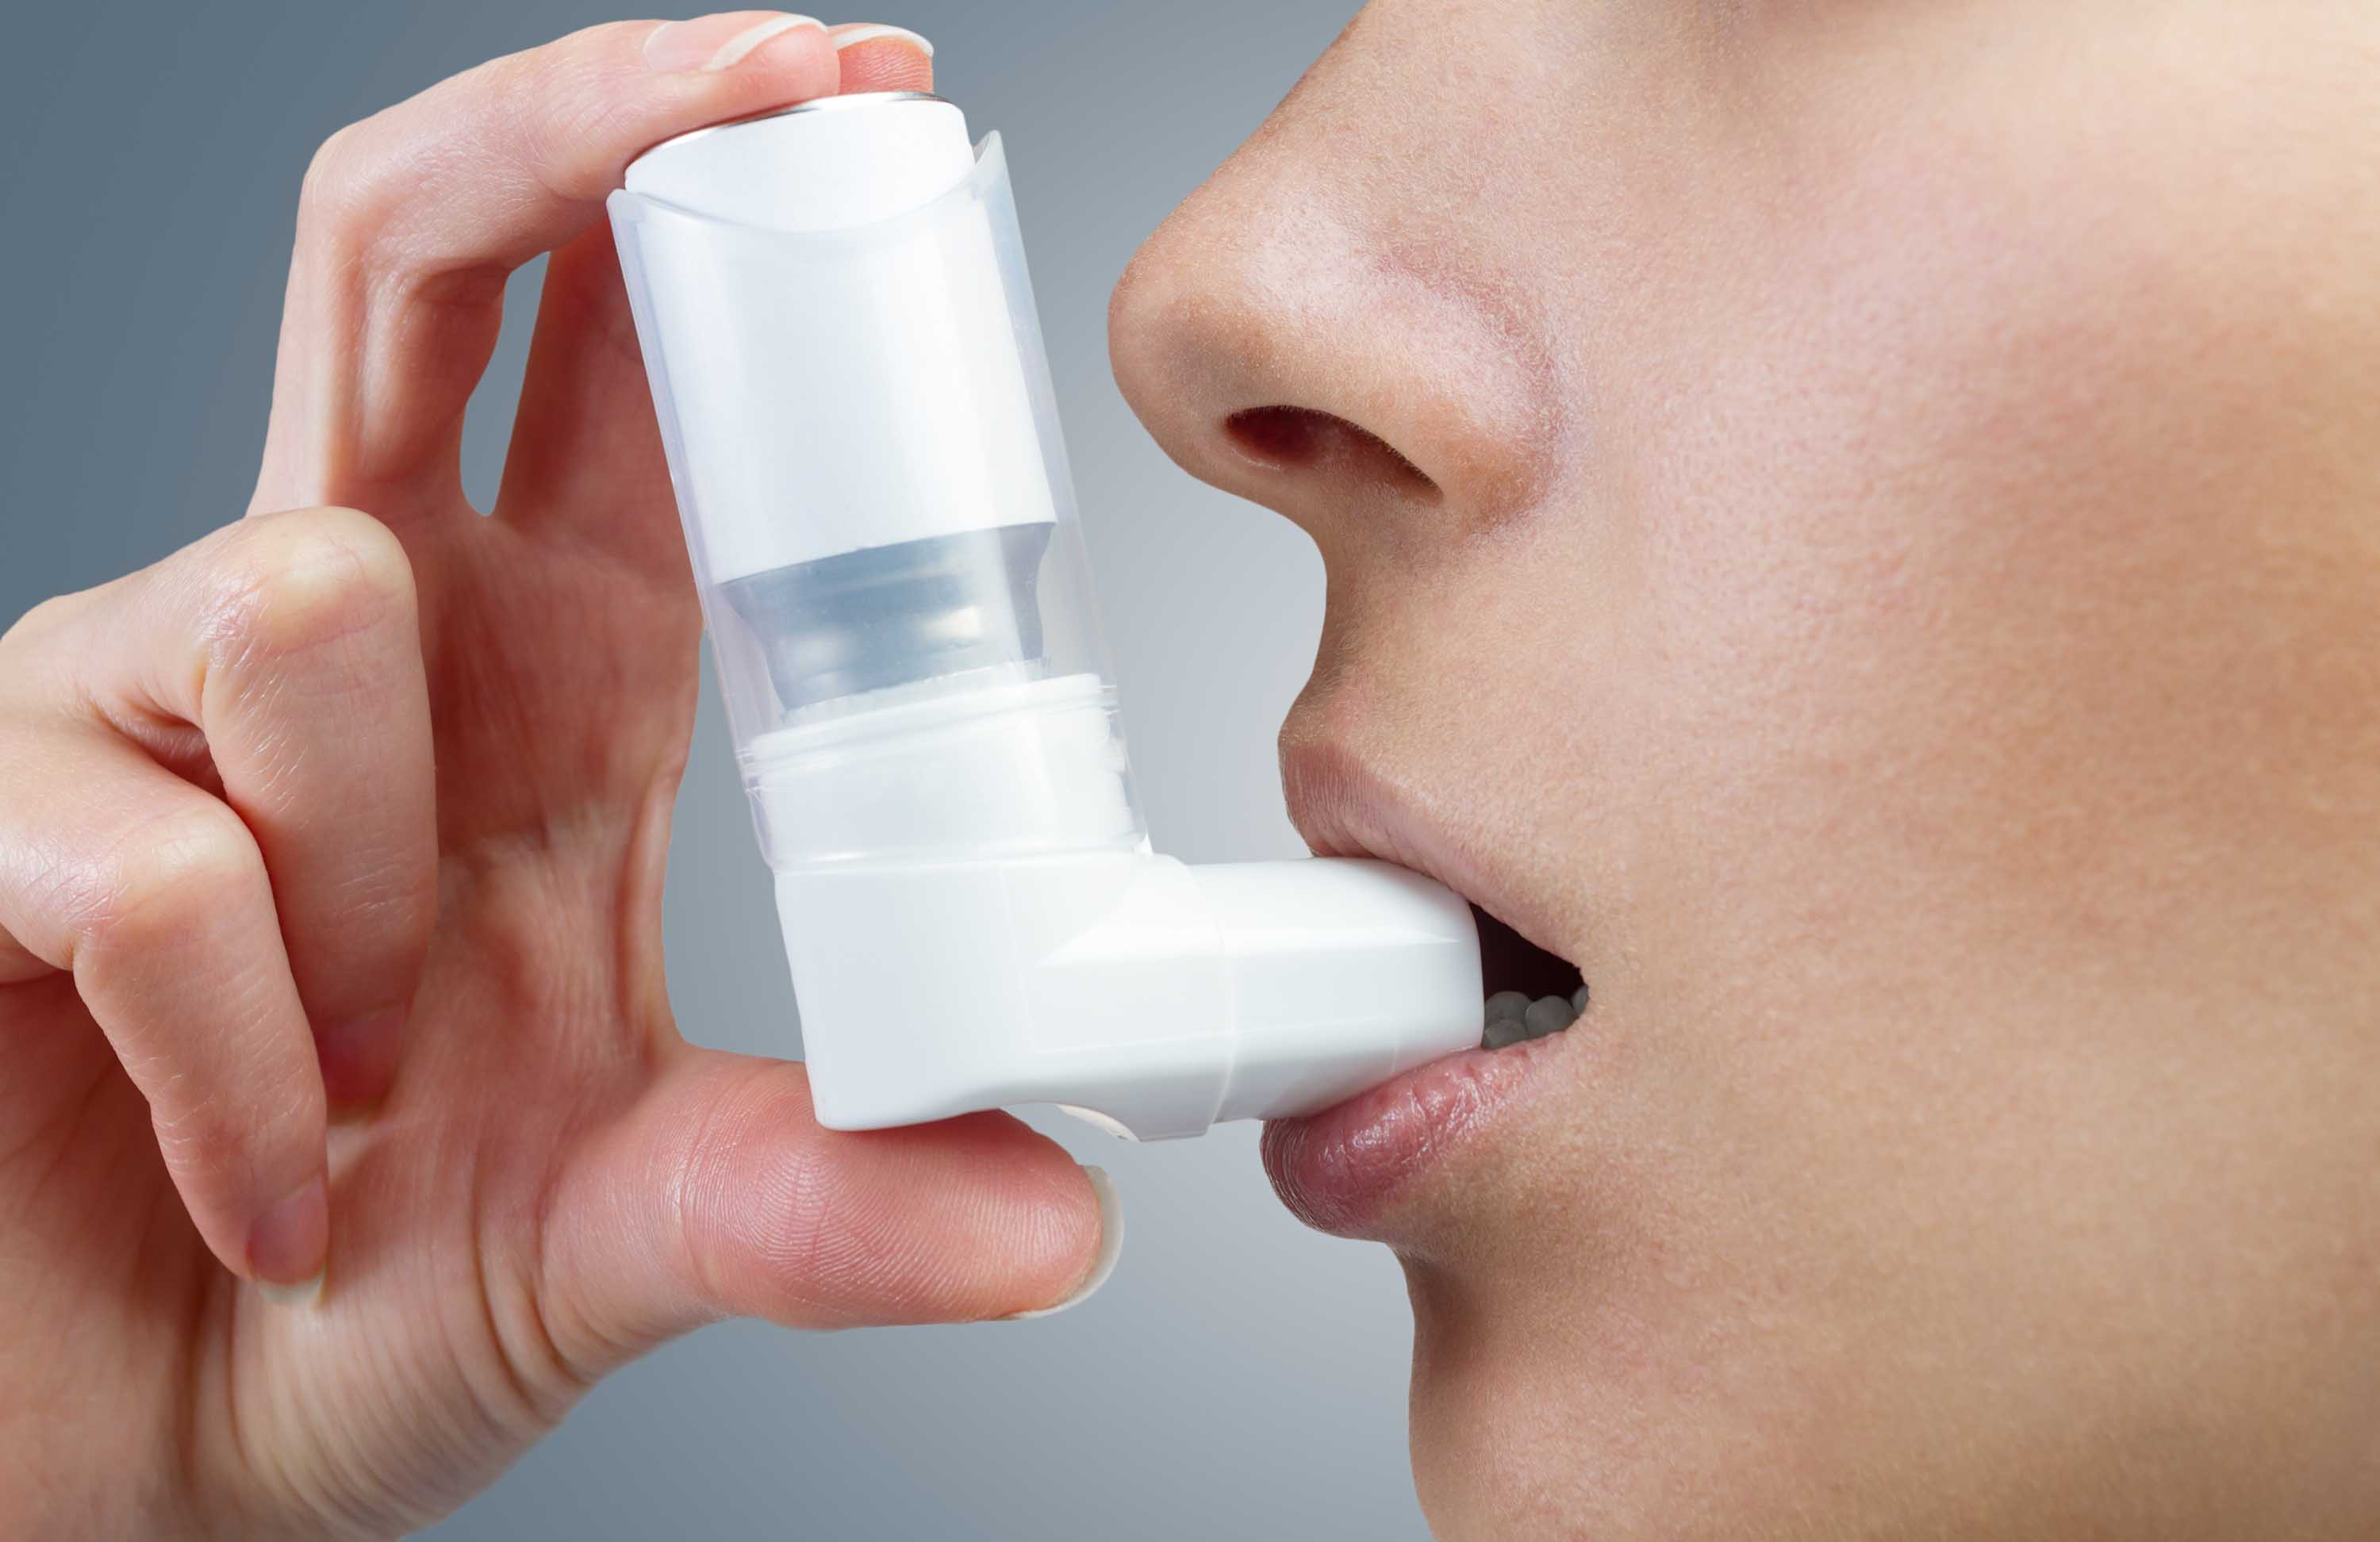 Asthma patients could cut carbon footprint by switching to 'greener' inhalers | CNN